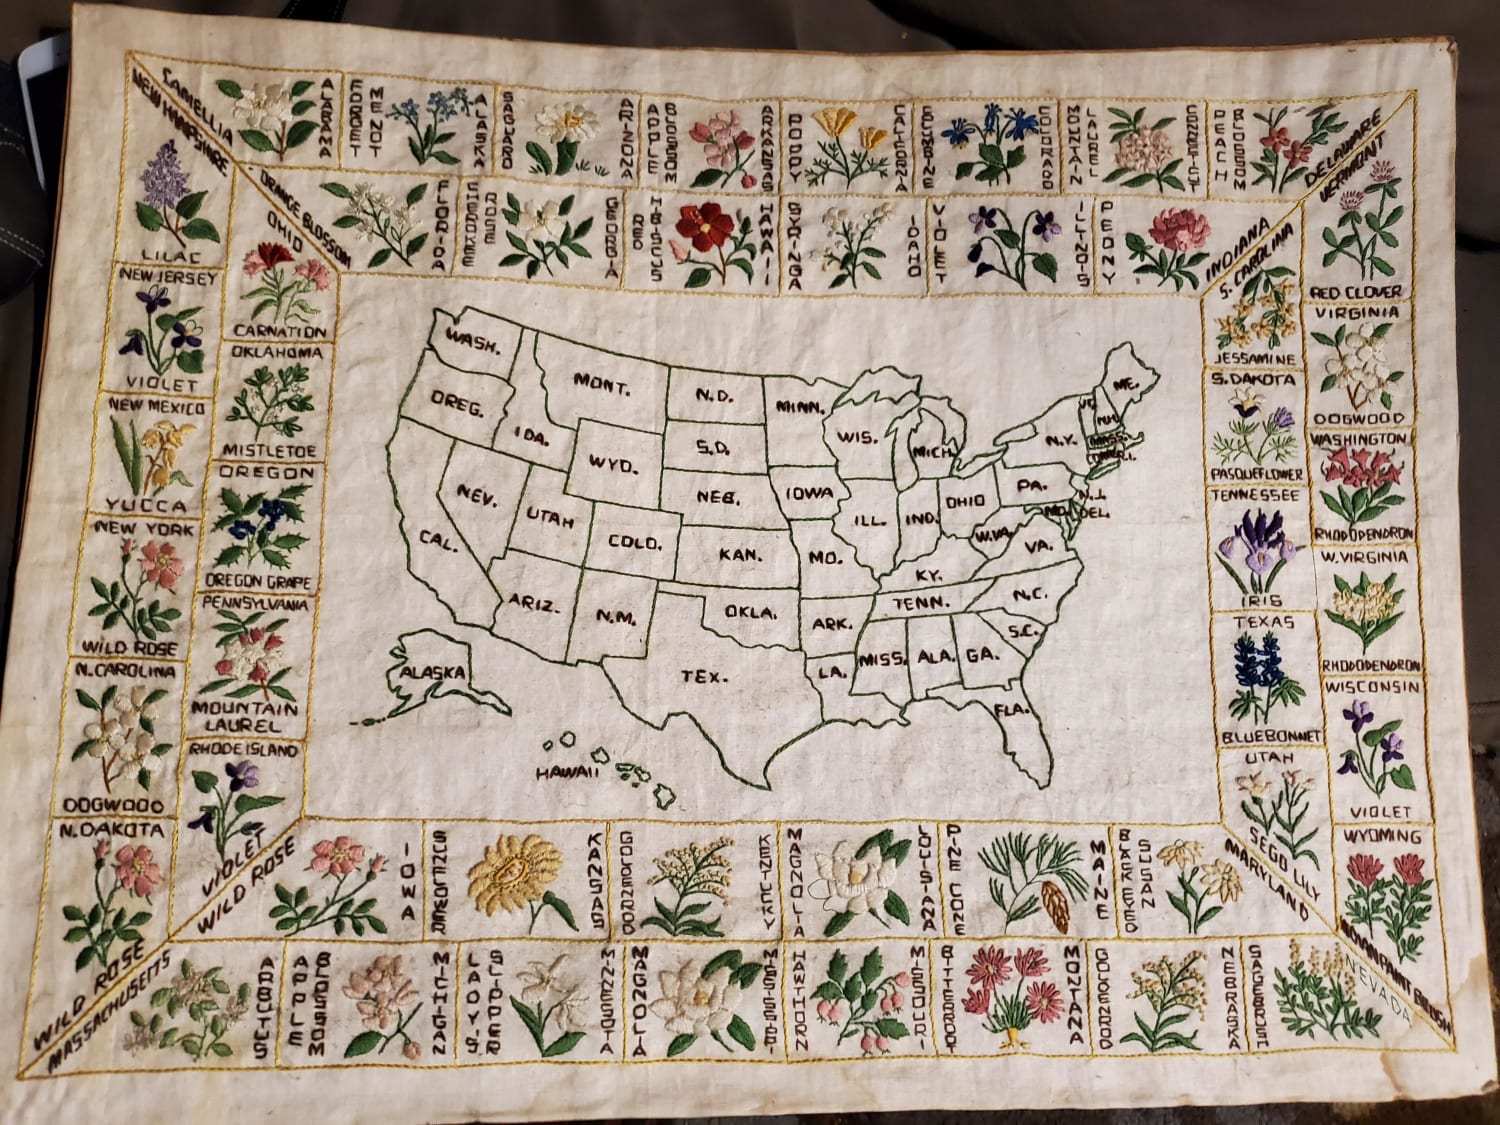 Helped my 70 year old aunt move today and was just floored by this wildflower map of the United States. She said her grandmother (my great grandma) had made it.